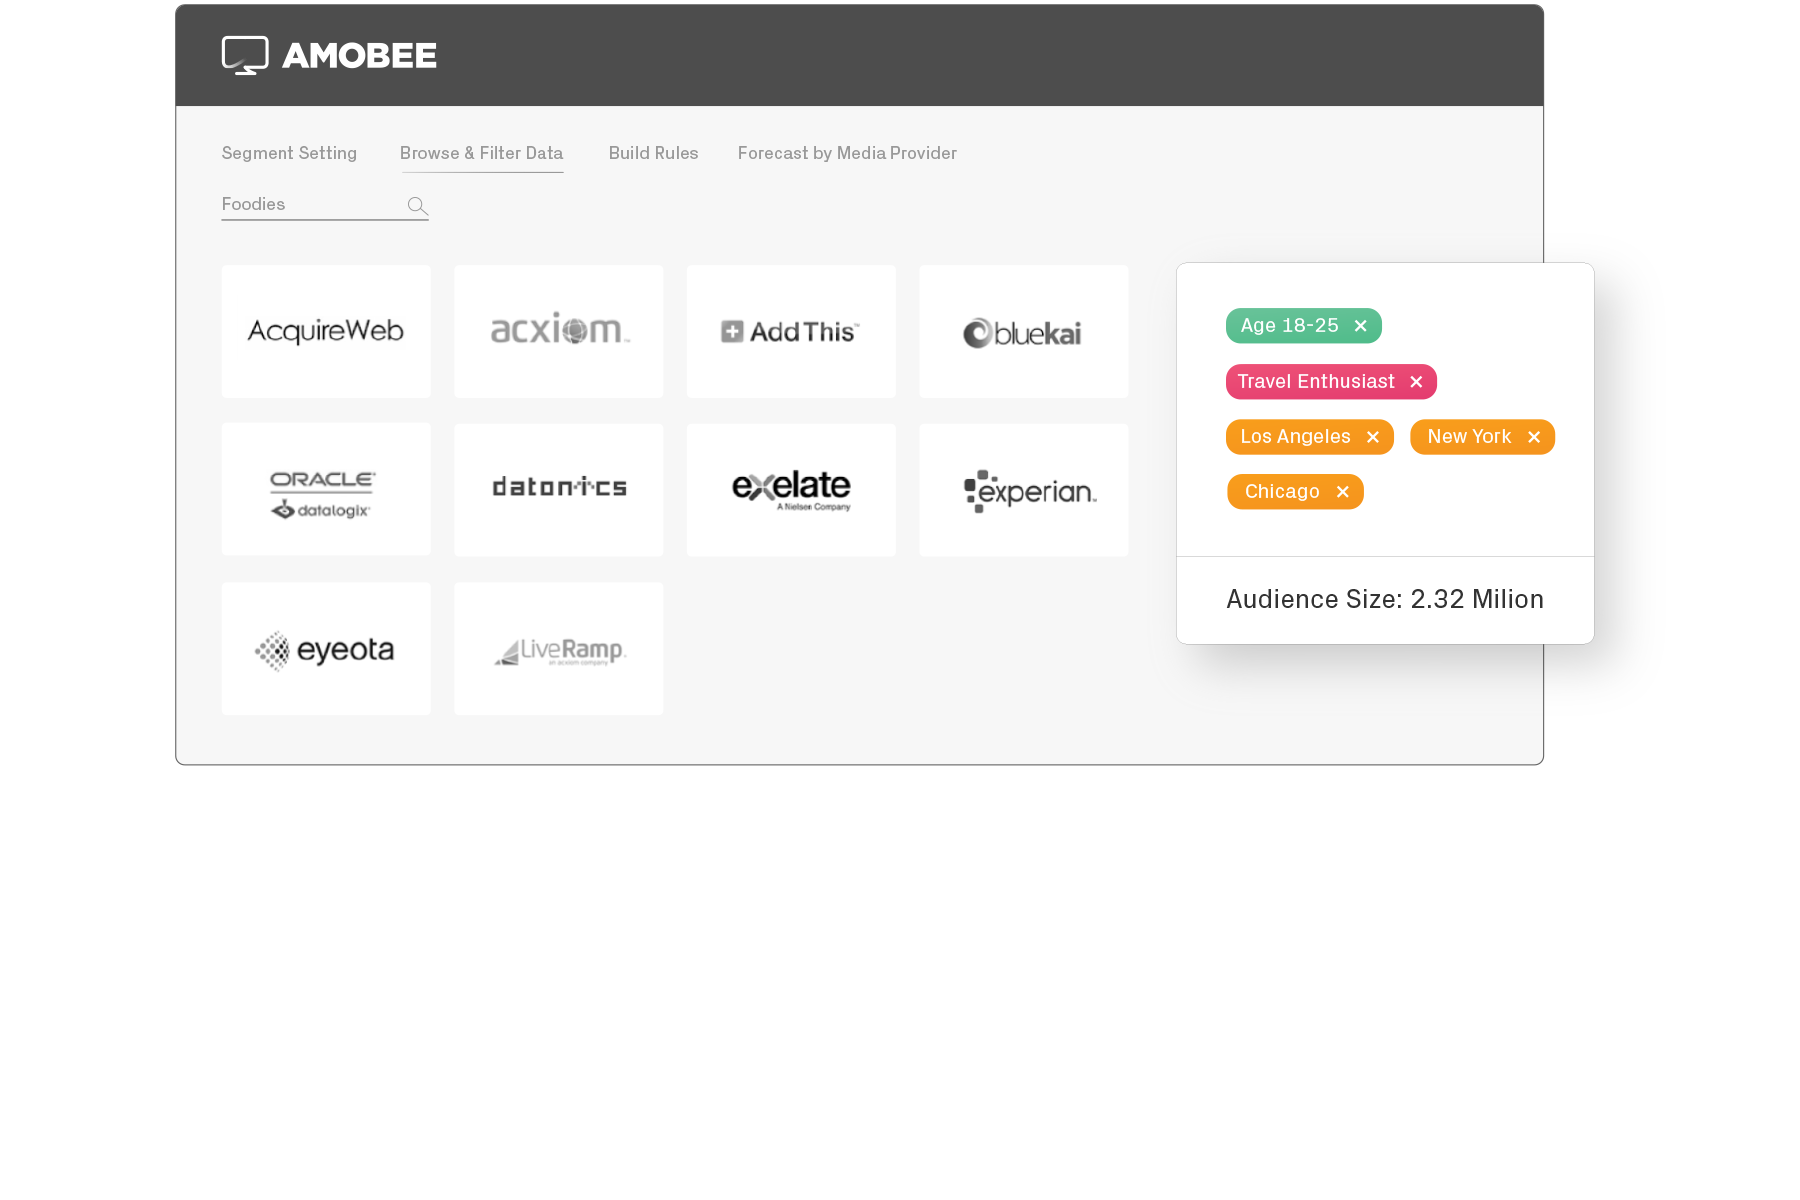 Discover better audience segmentation with Amobee